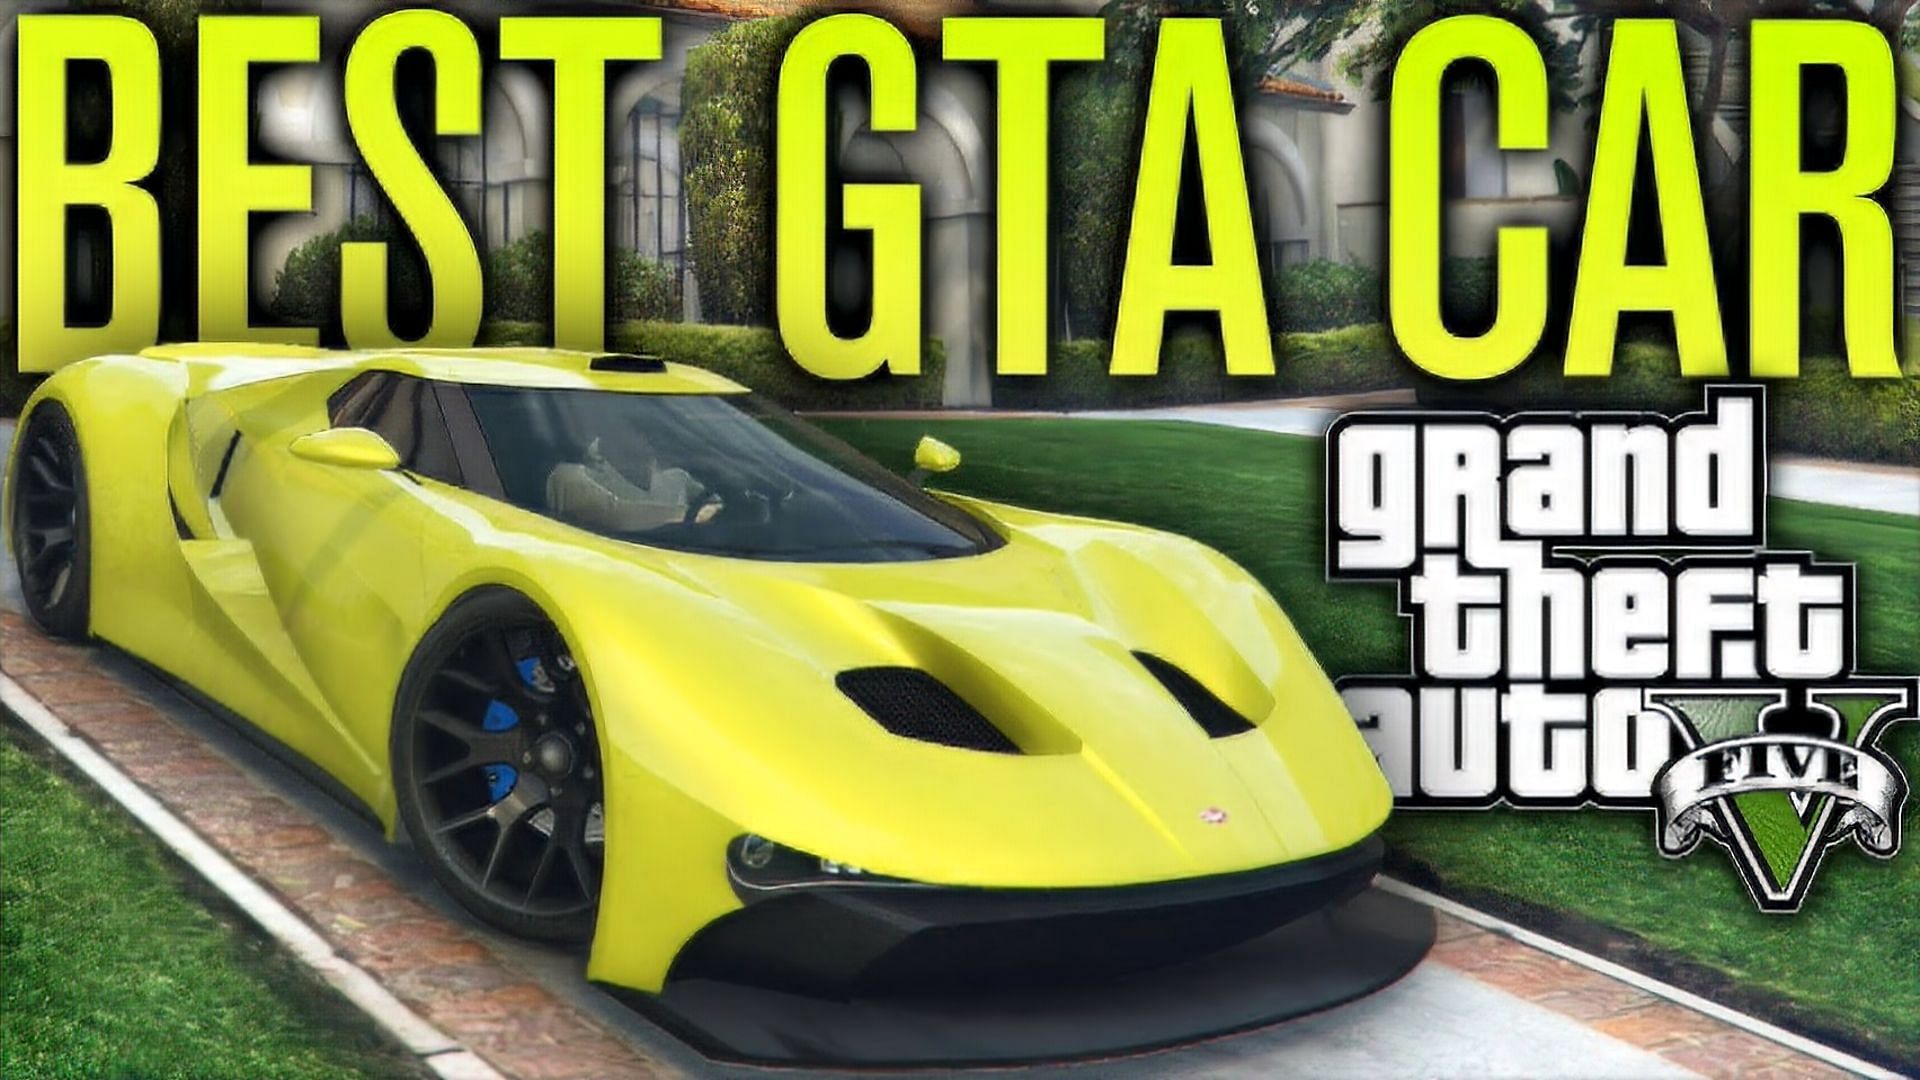 (Vapid is the largest car manufacturer in GTA Online. Image via YouTube/BlackPanthaa)